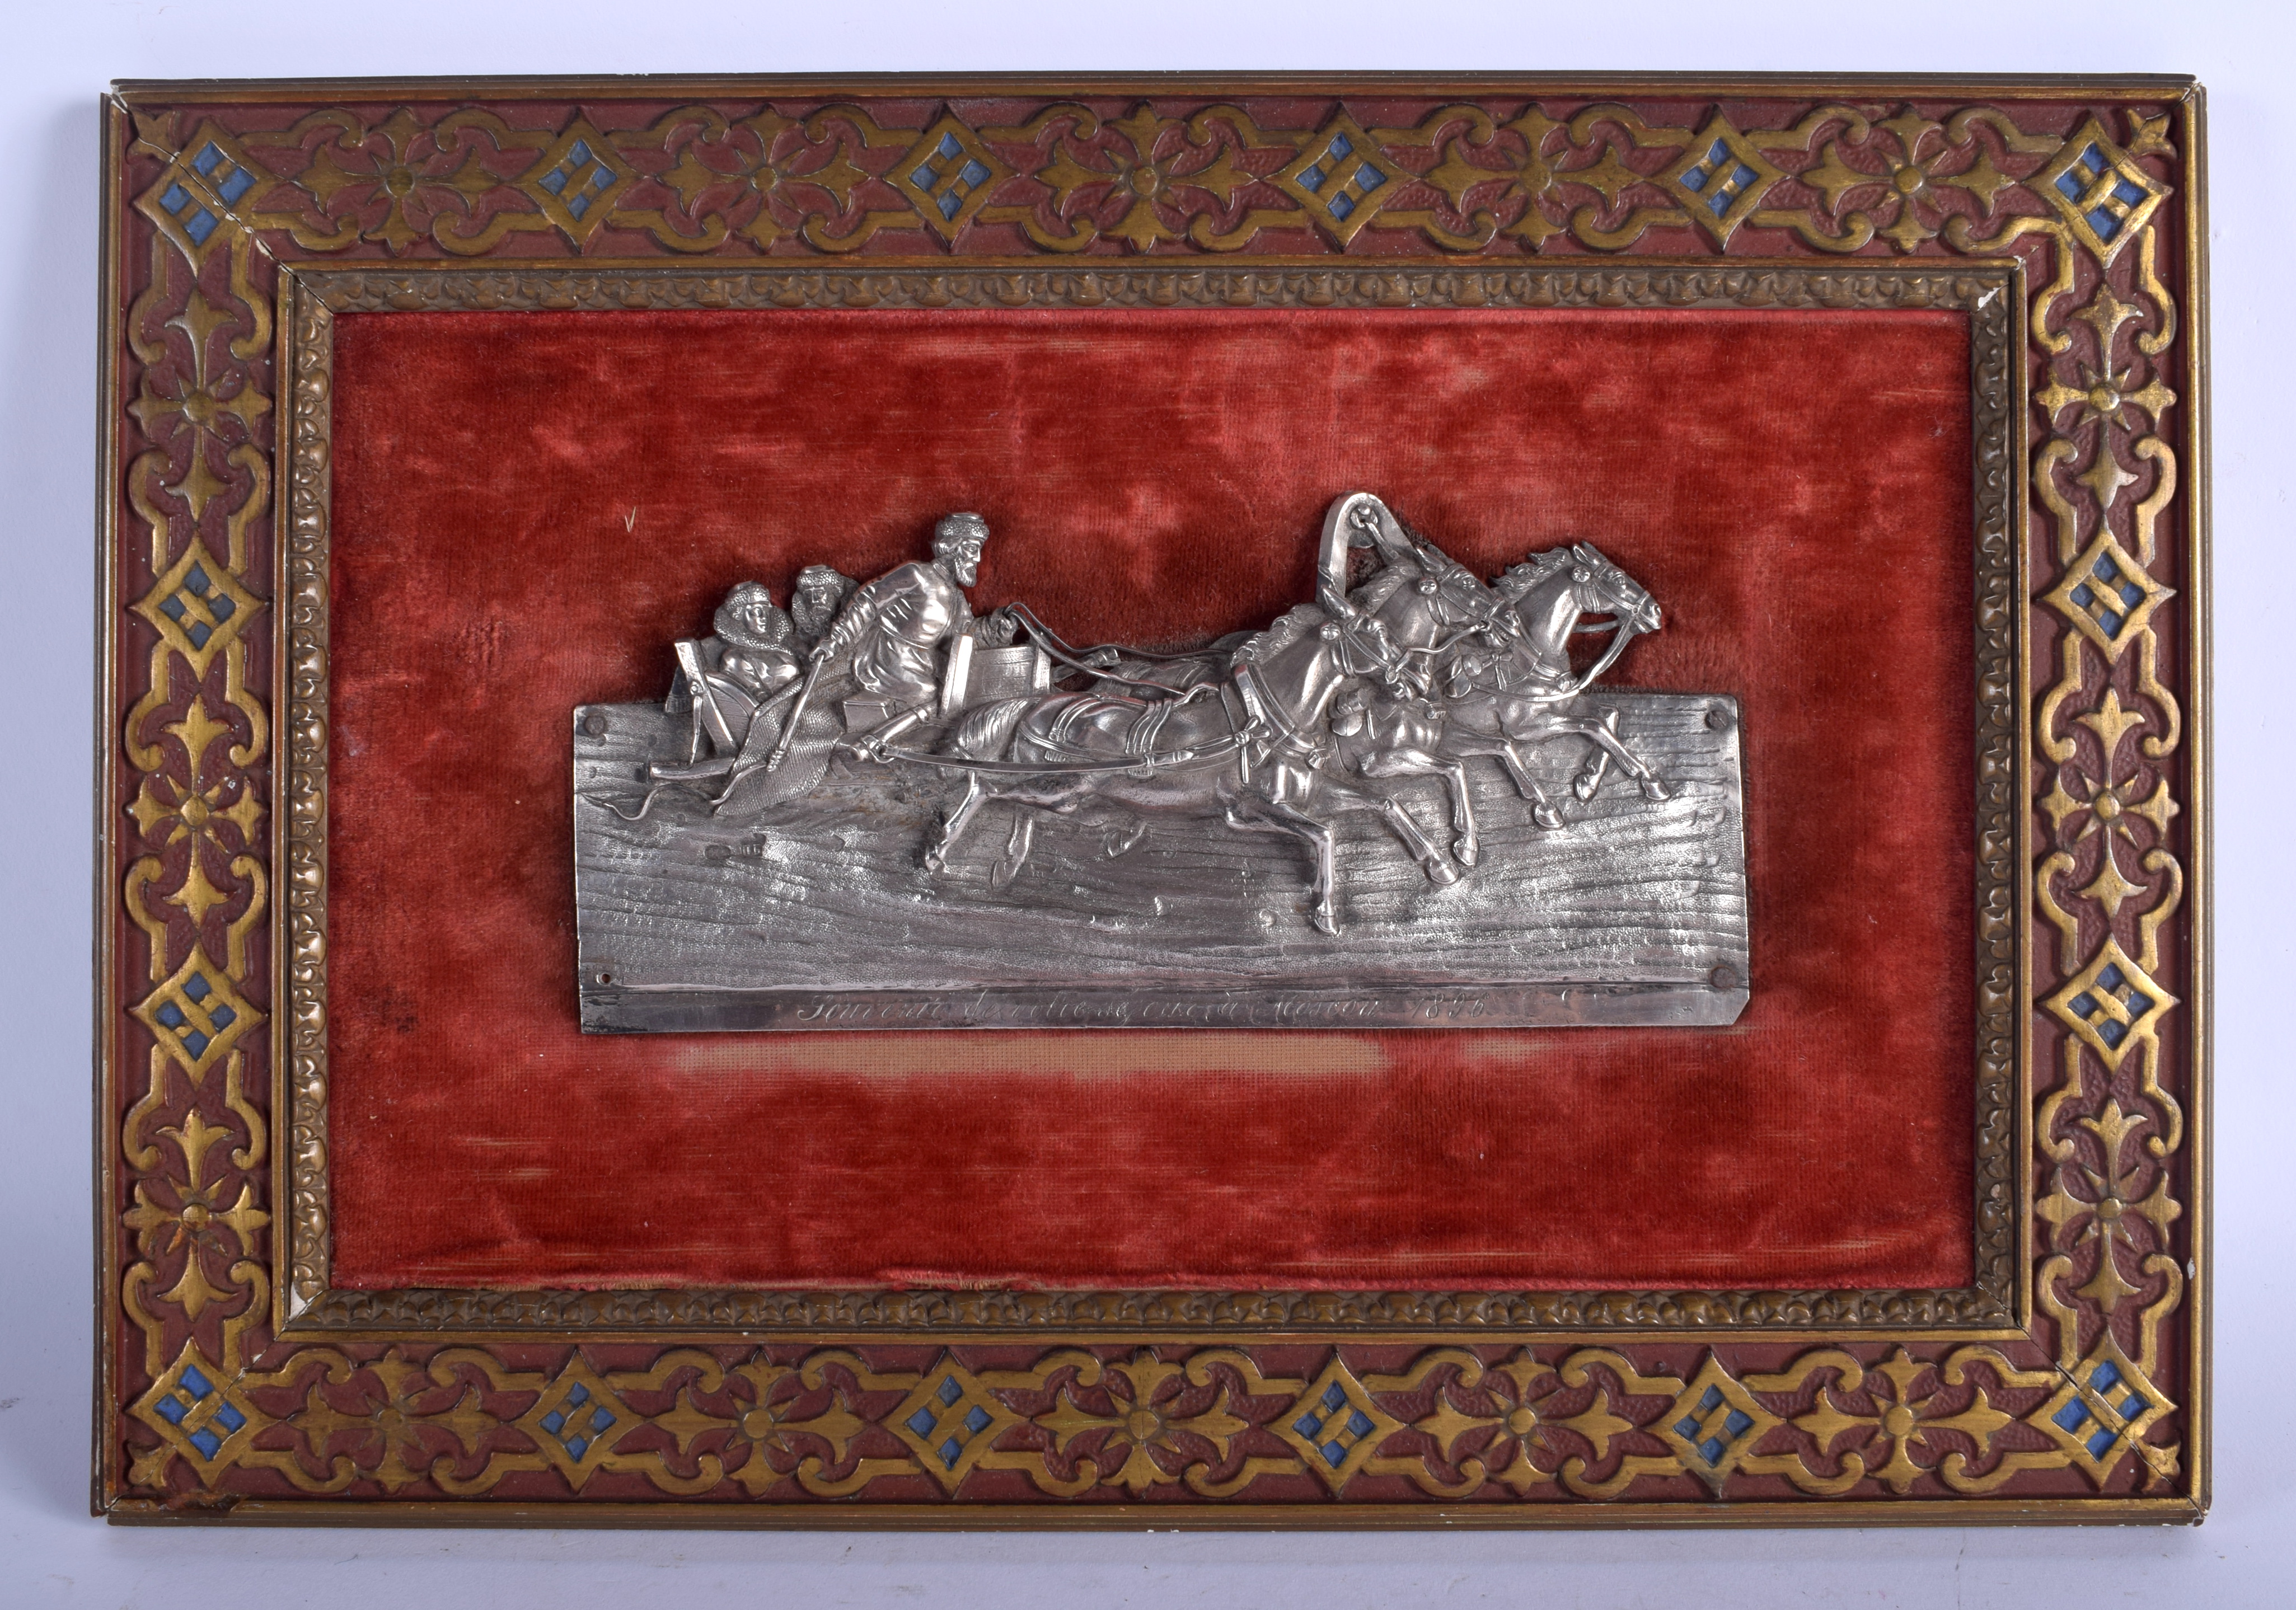 AN ANTIQU RUSSIAN SILVER MOUNTED CARVED WOOD PLAQYE depicting a troika. Silver 19 cm x 9 cm.